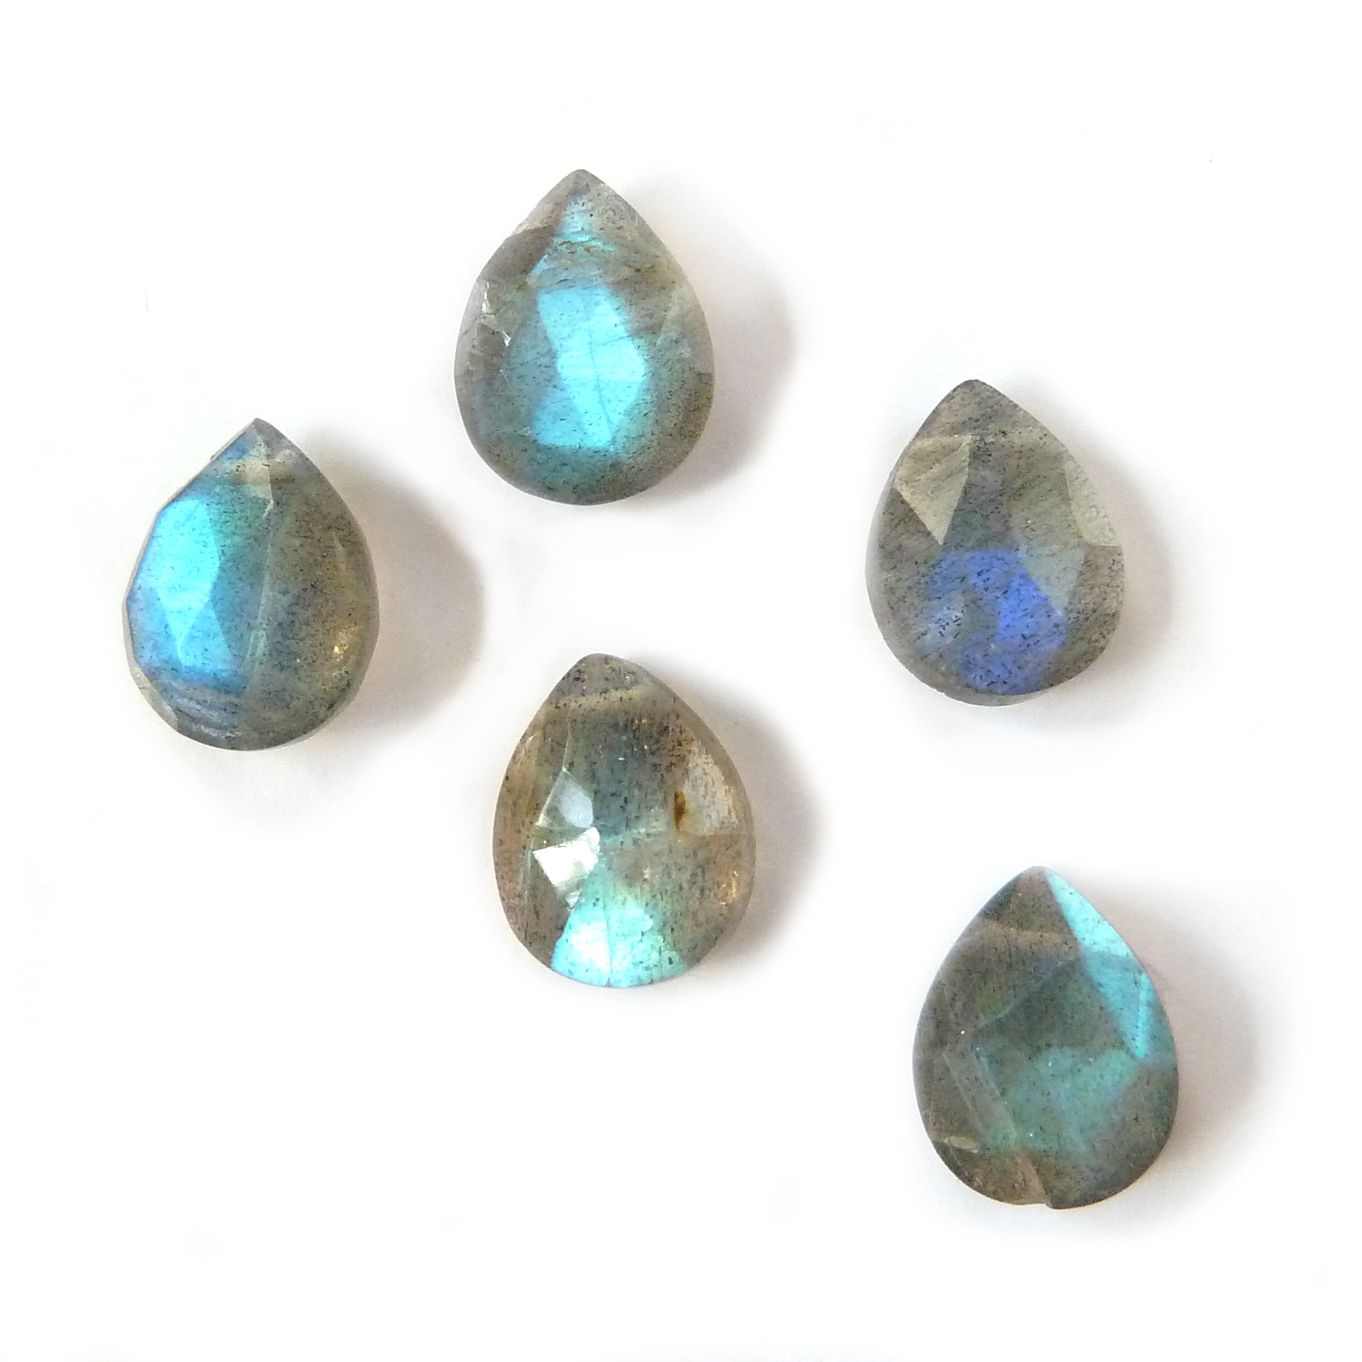 Labradorite Faceted Teardrop Briolette Beads - Approx From 7mm